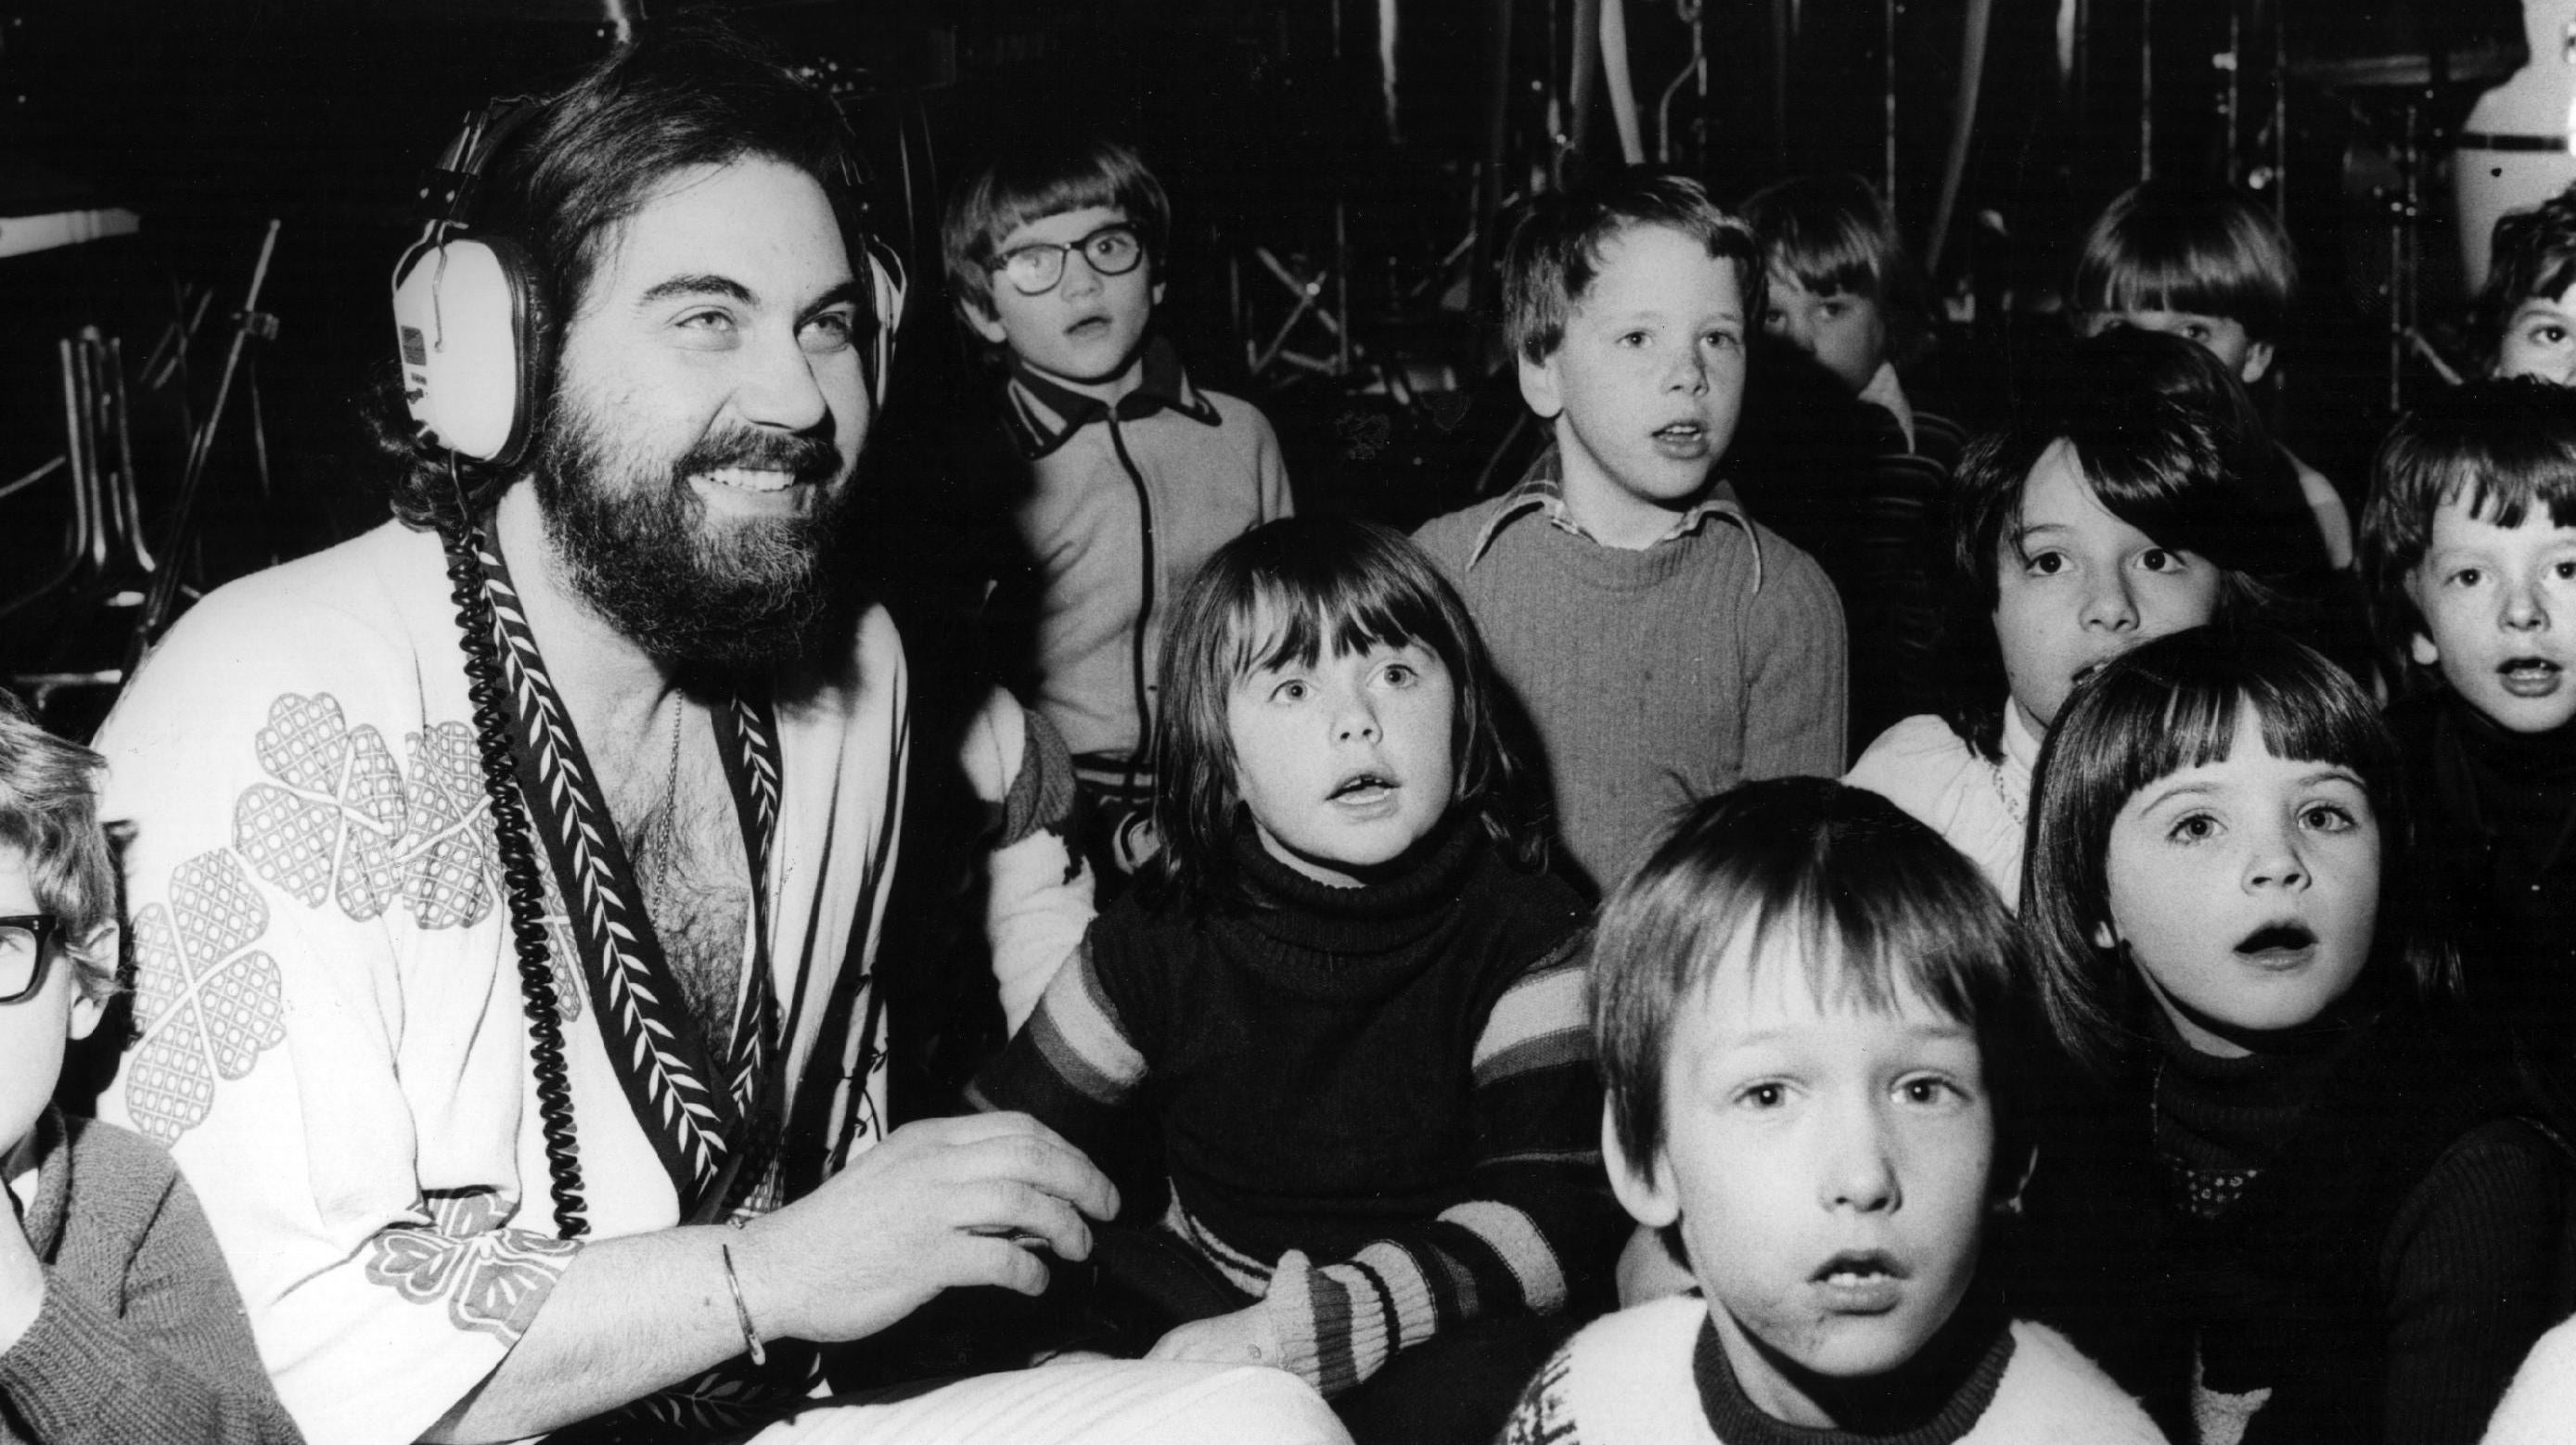 Evangalos Papathanassiou, better known as Vangelis, records a song with a group of children. (Photo: Fred Mott, Getty Images)